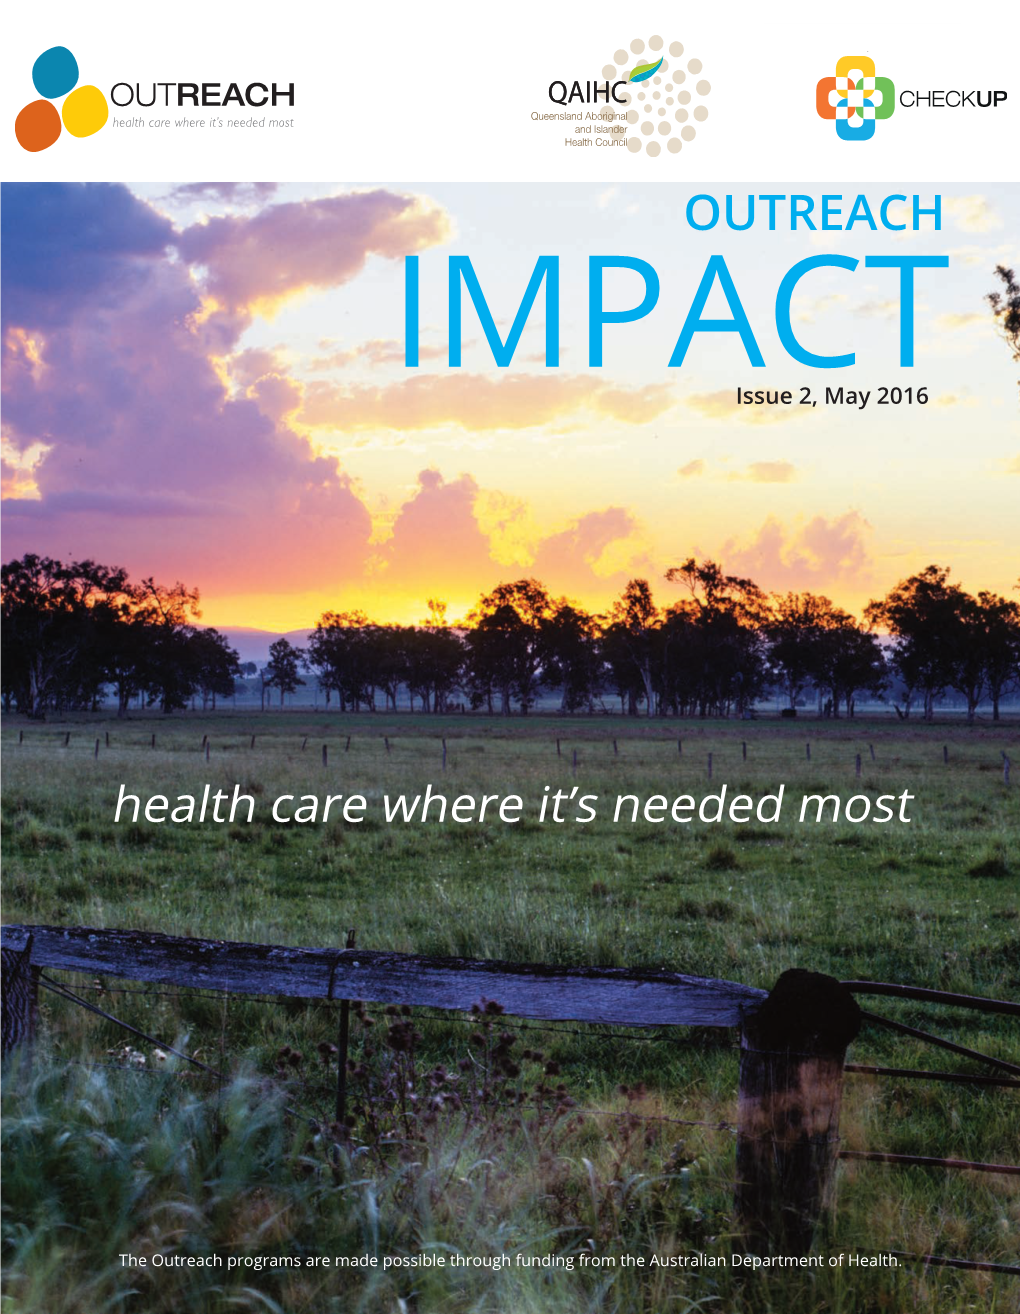 OUTREACH Health Care Where It's Needed Most